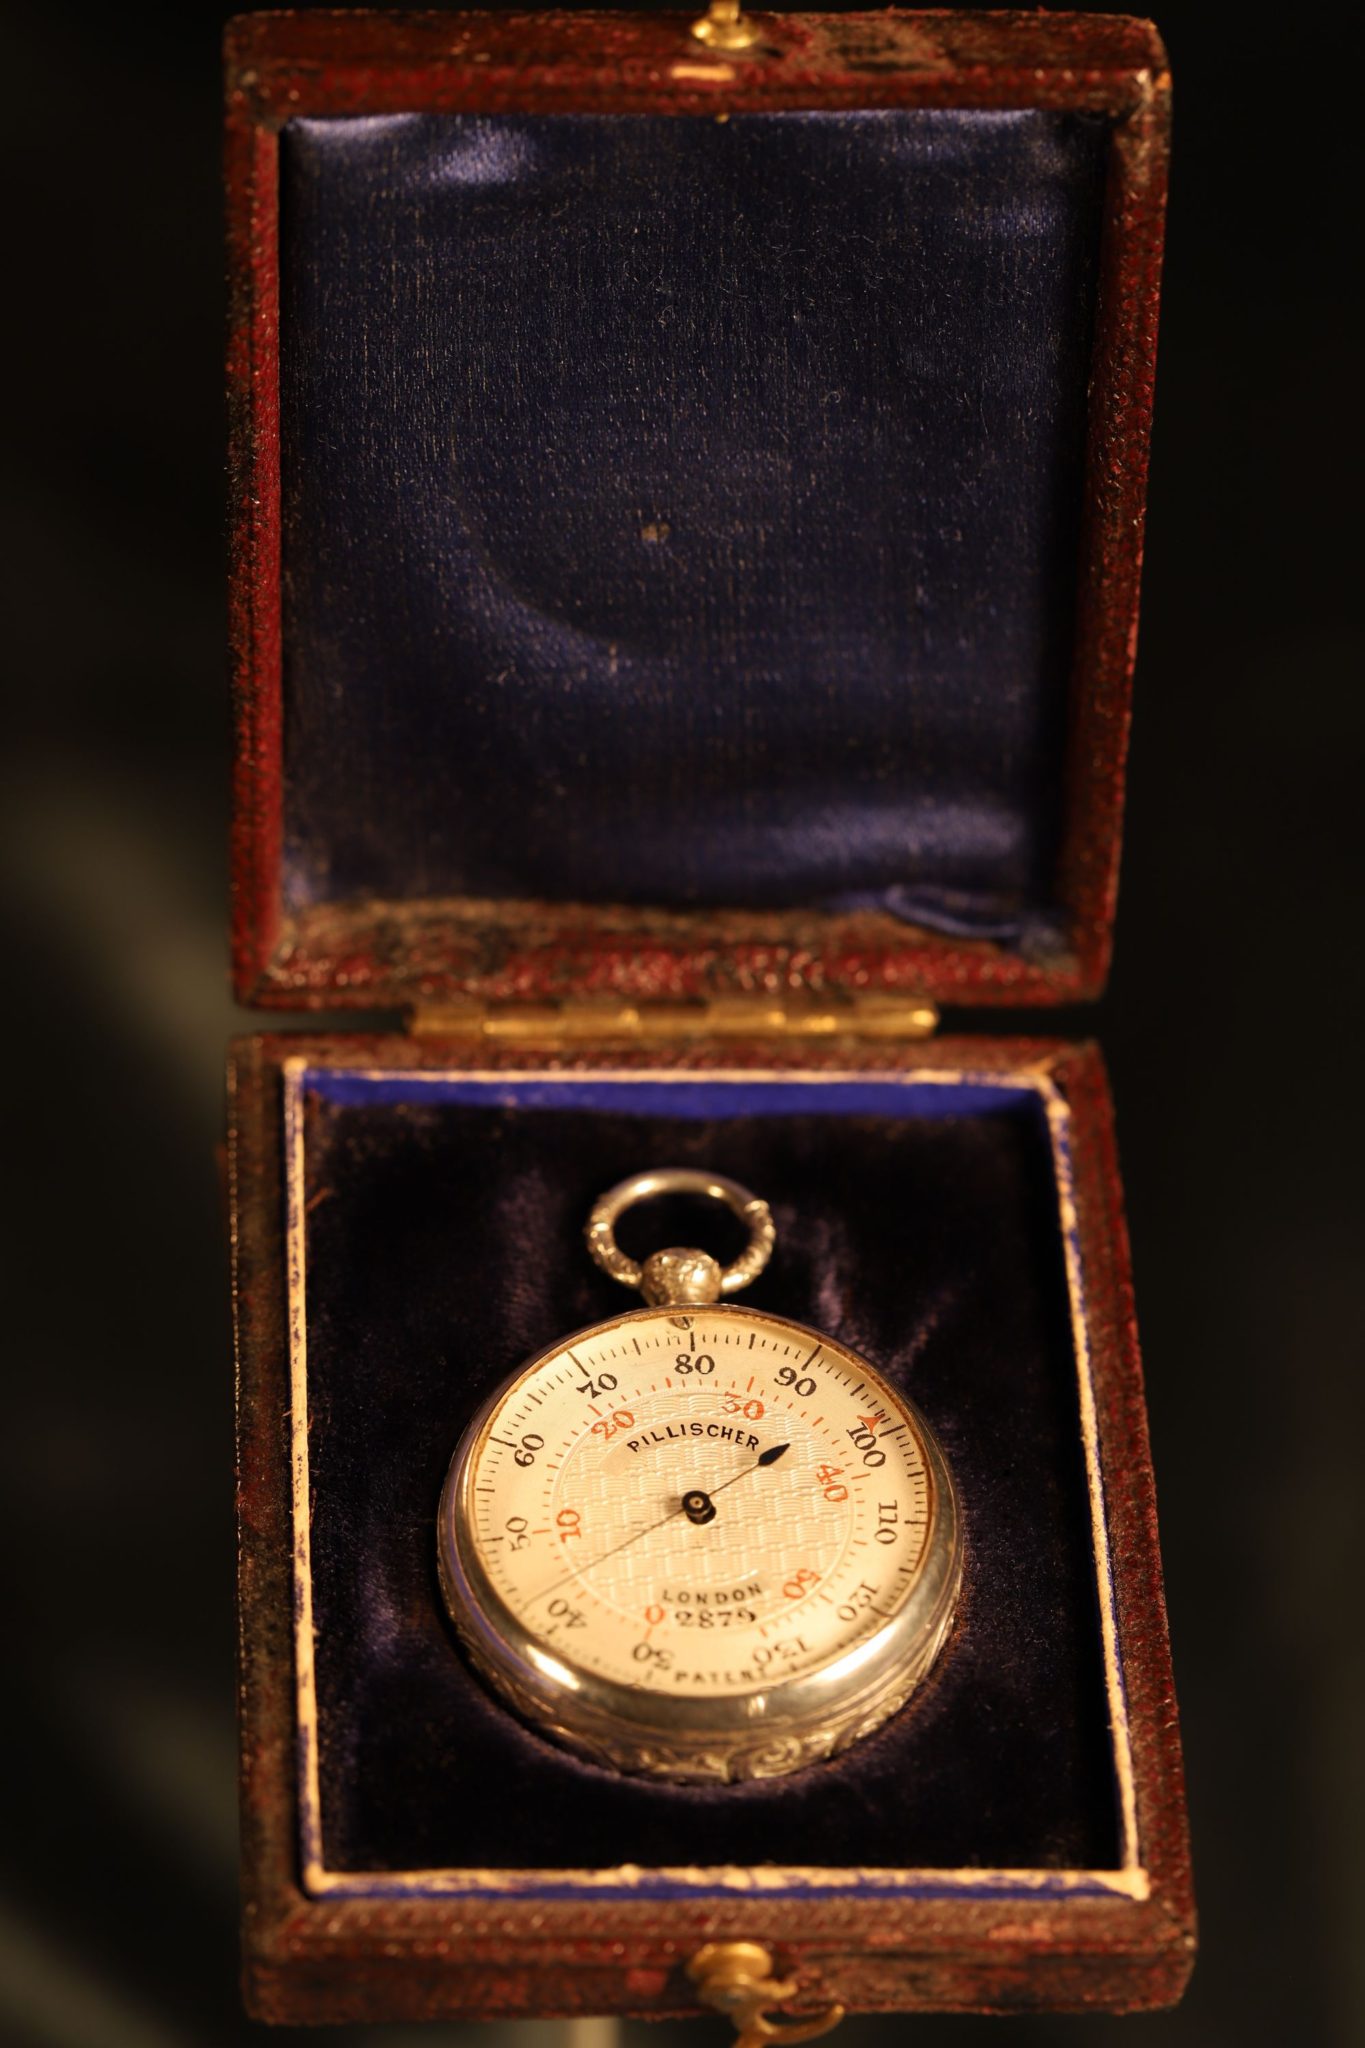 Image of Immisch Avitreous Thermometer No 2879 Retailed by Pillischer